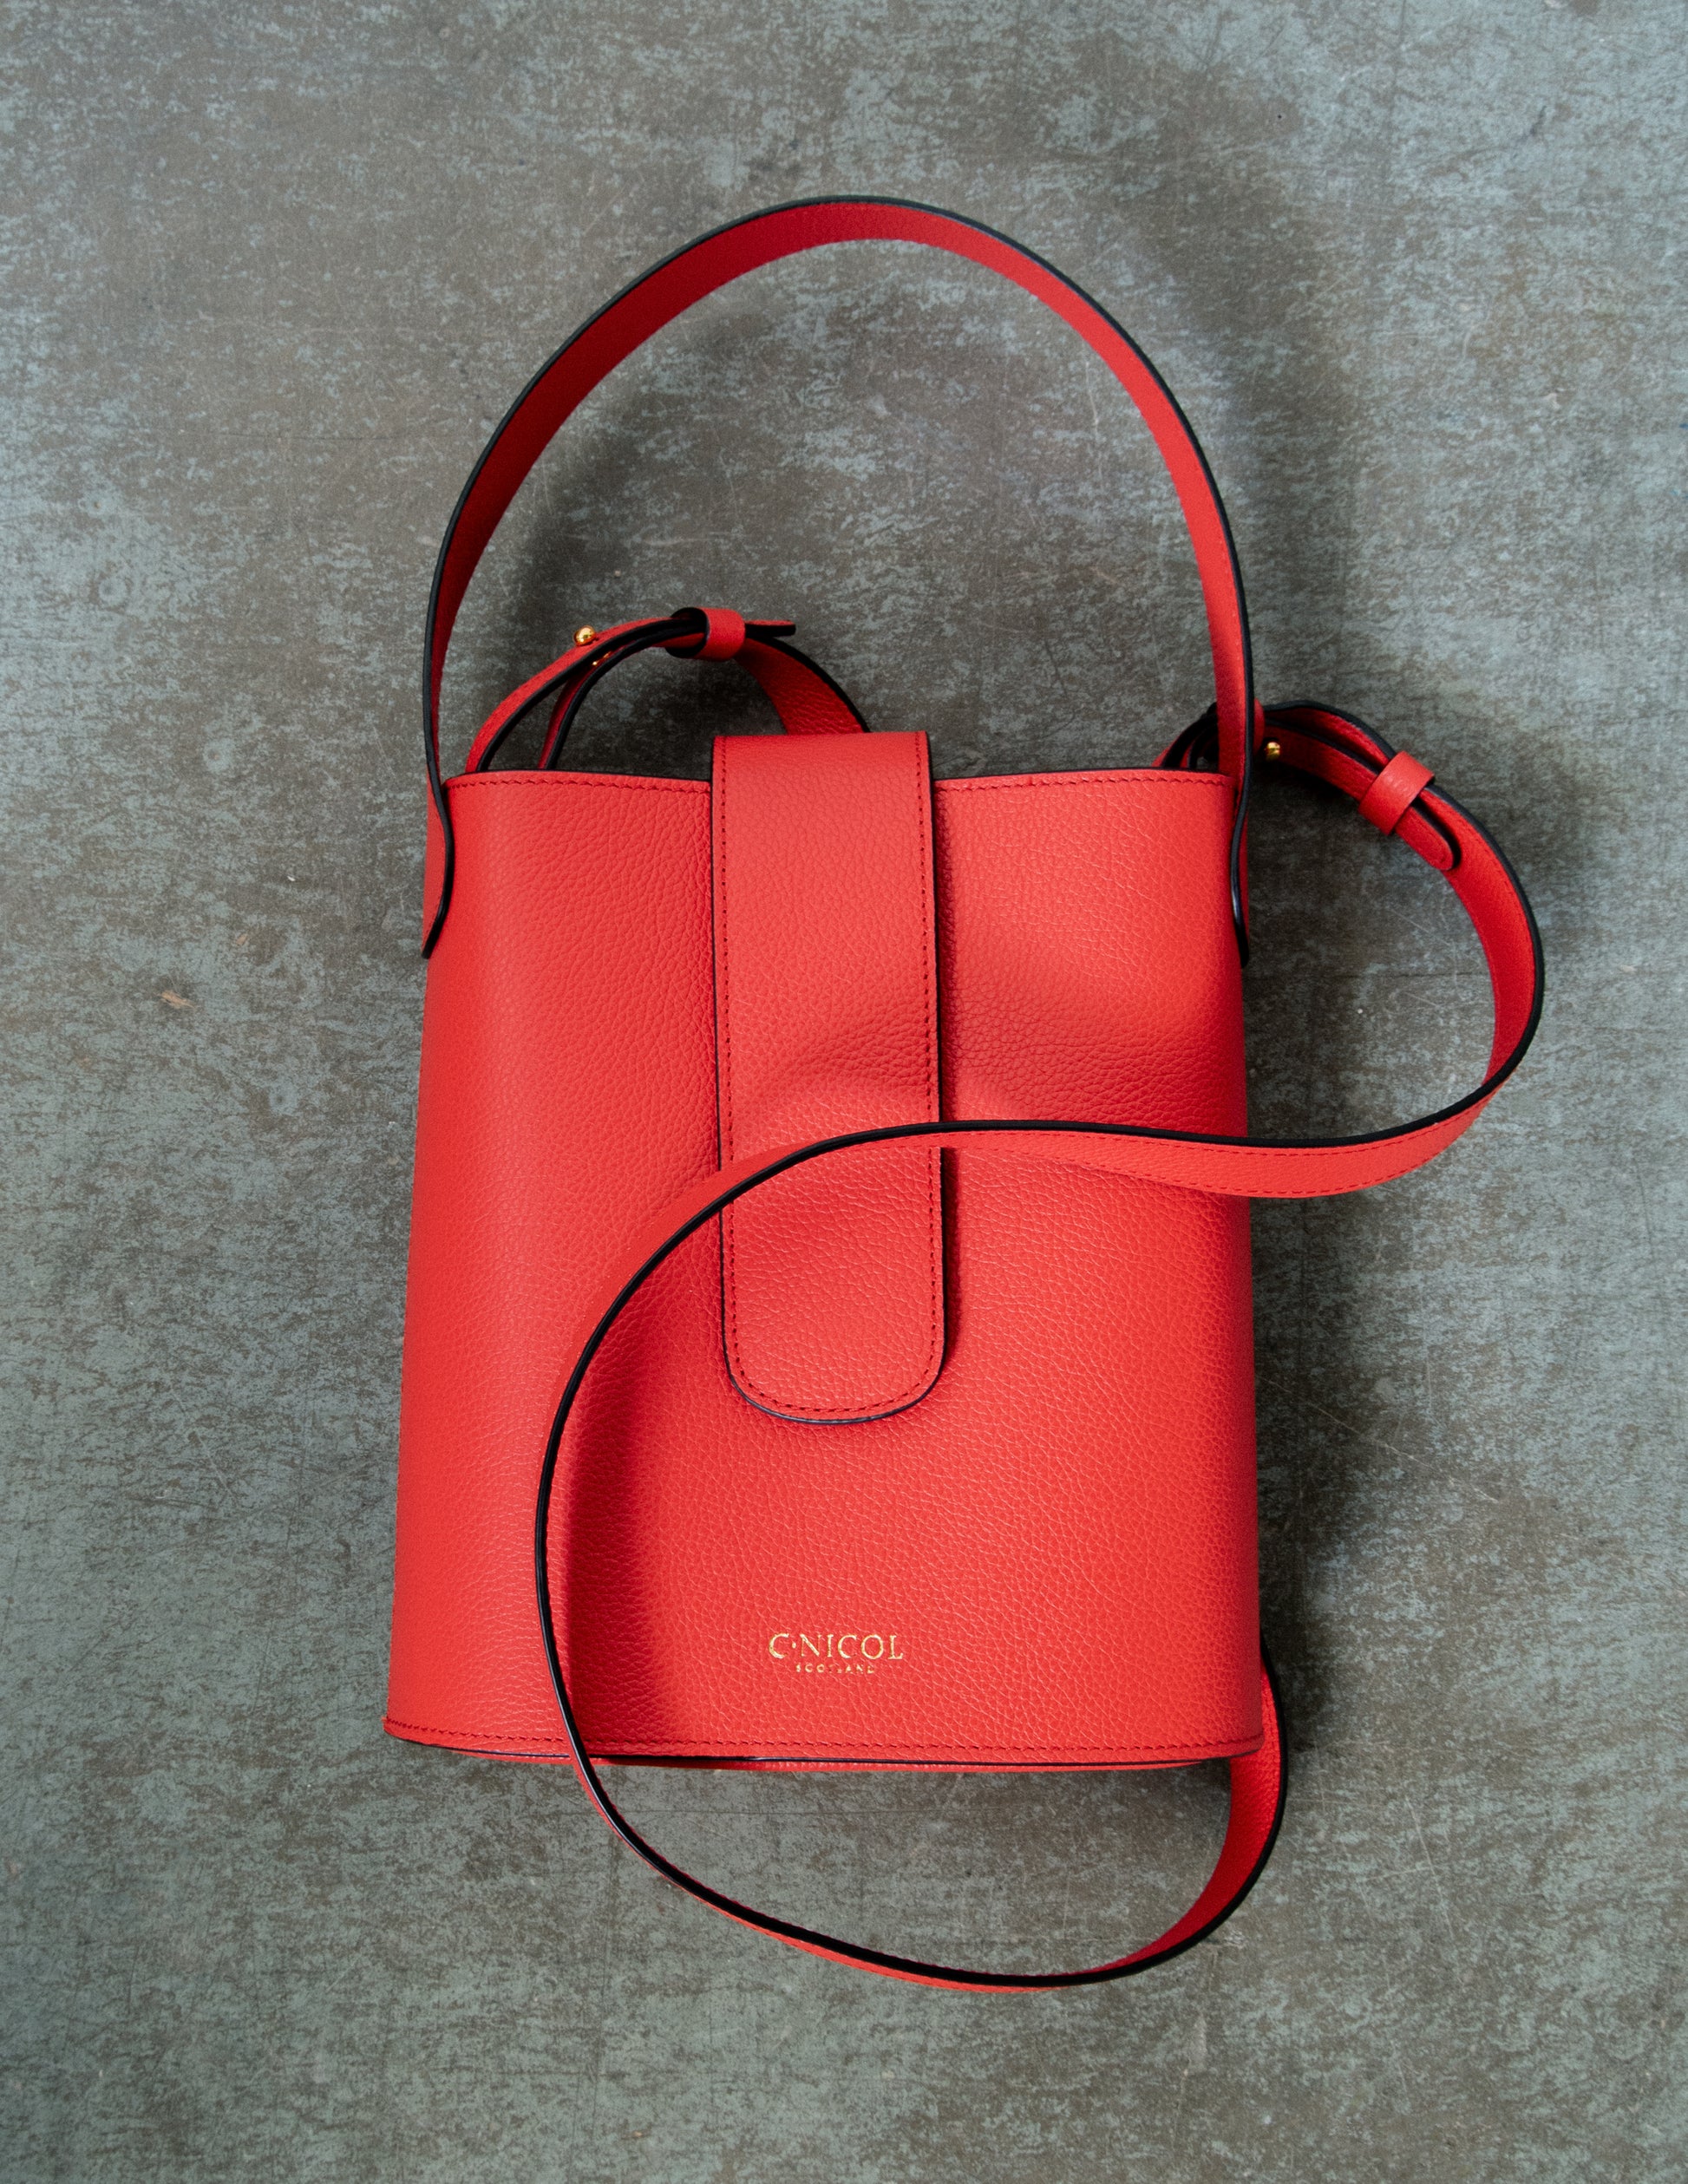 CNicol Red Leather Holly Bag against Grey Textured Background